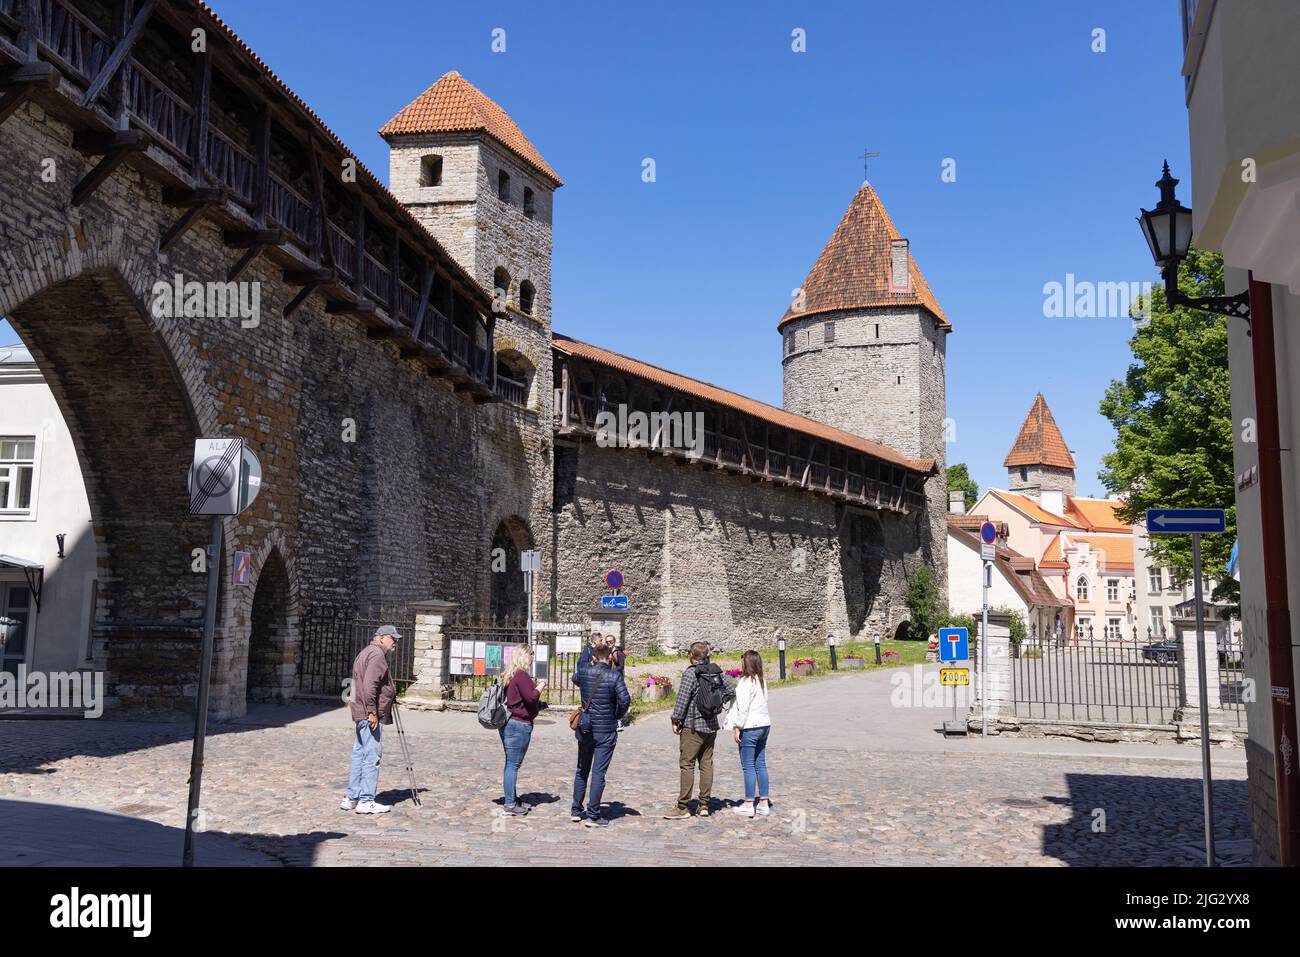 People at Tallinn city walls, a section of the 14th century medieval fortifications including the Nuns Tower, Tallinn old town, Tallinn Estonia Stock Photo